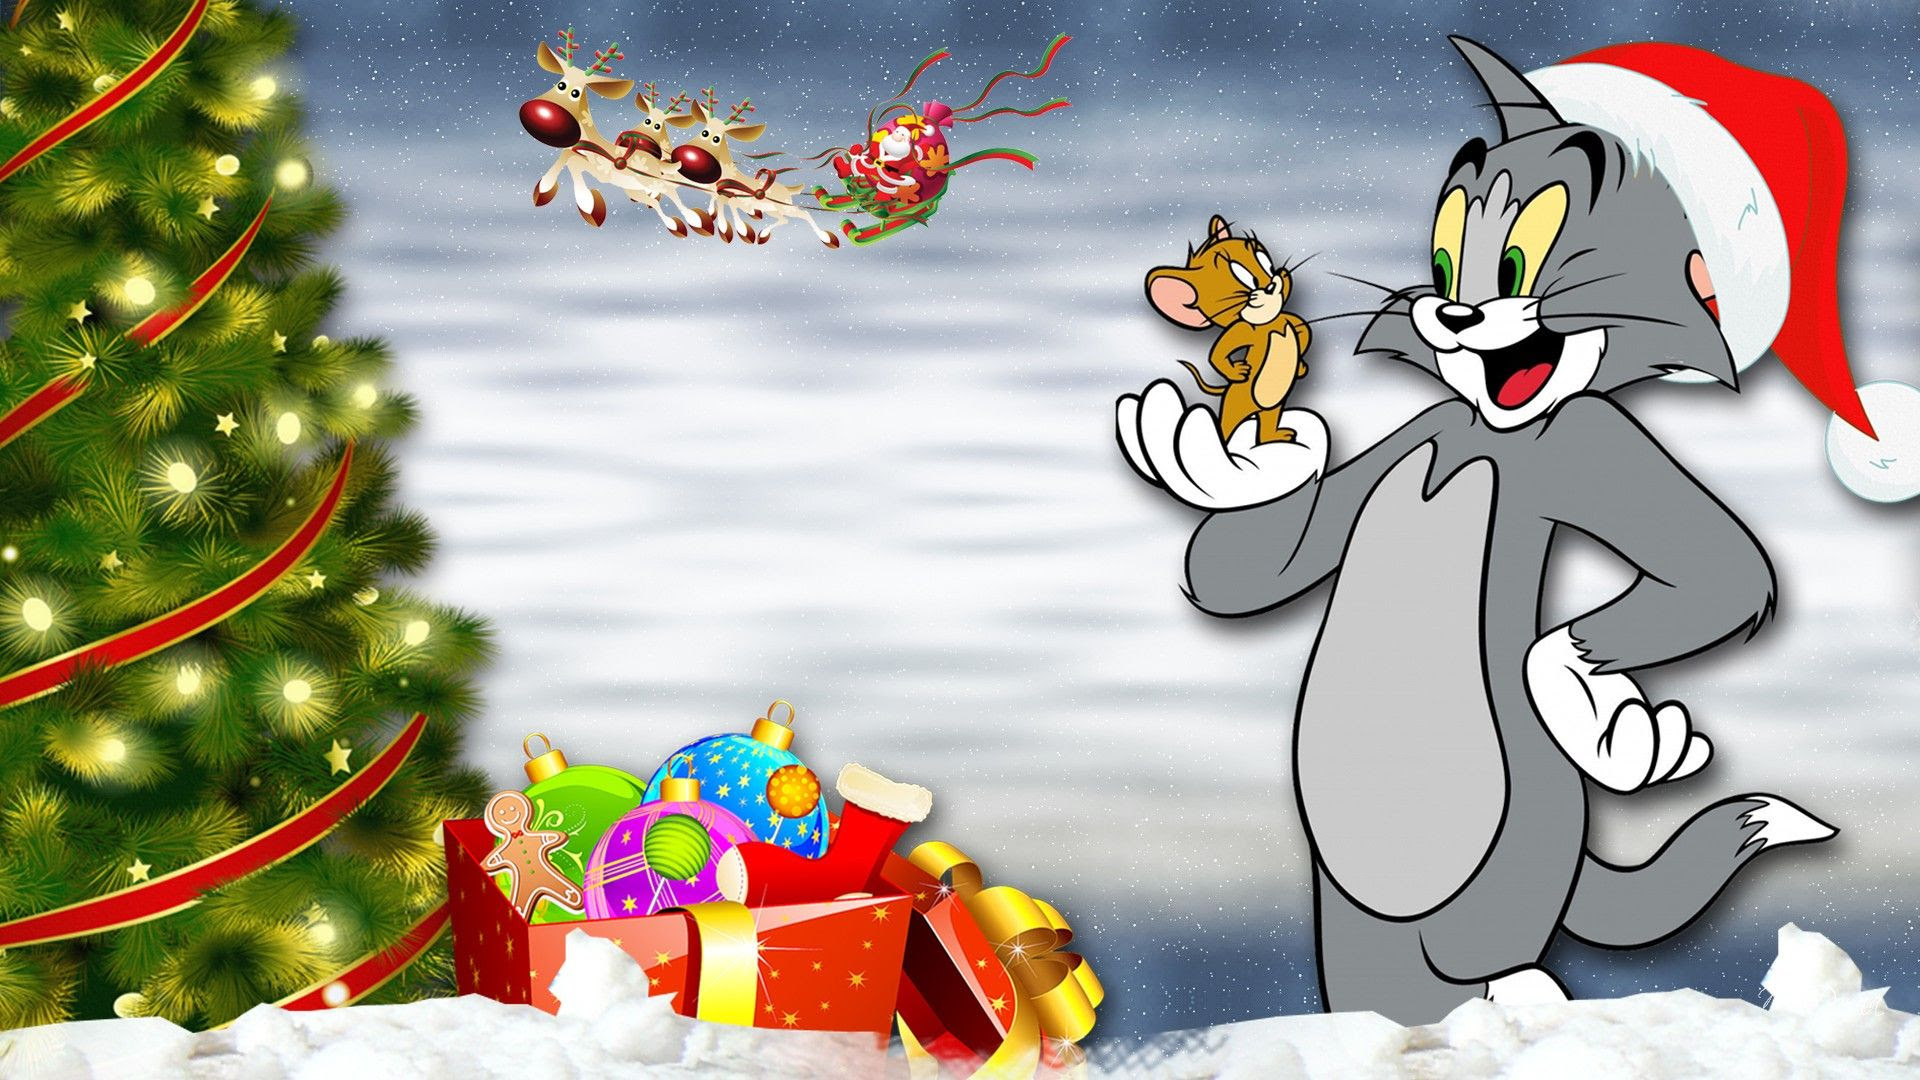 Tom and Jerry Christmas Eve | Tom and jerry wallpapers, Tom and jerry cartoon, Tom and jerry pictures